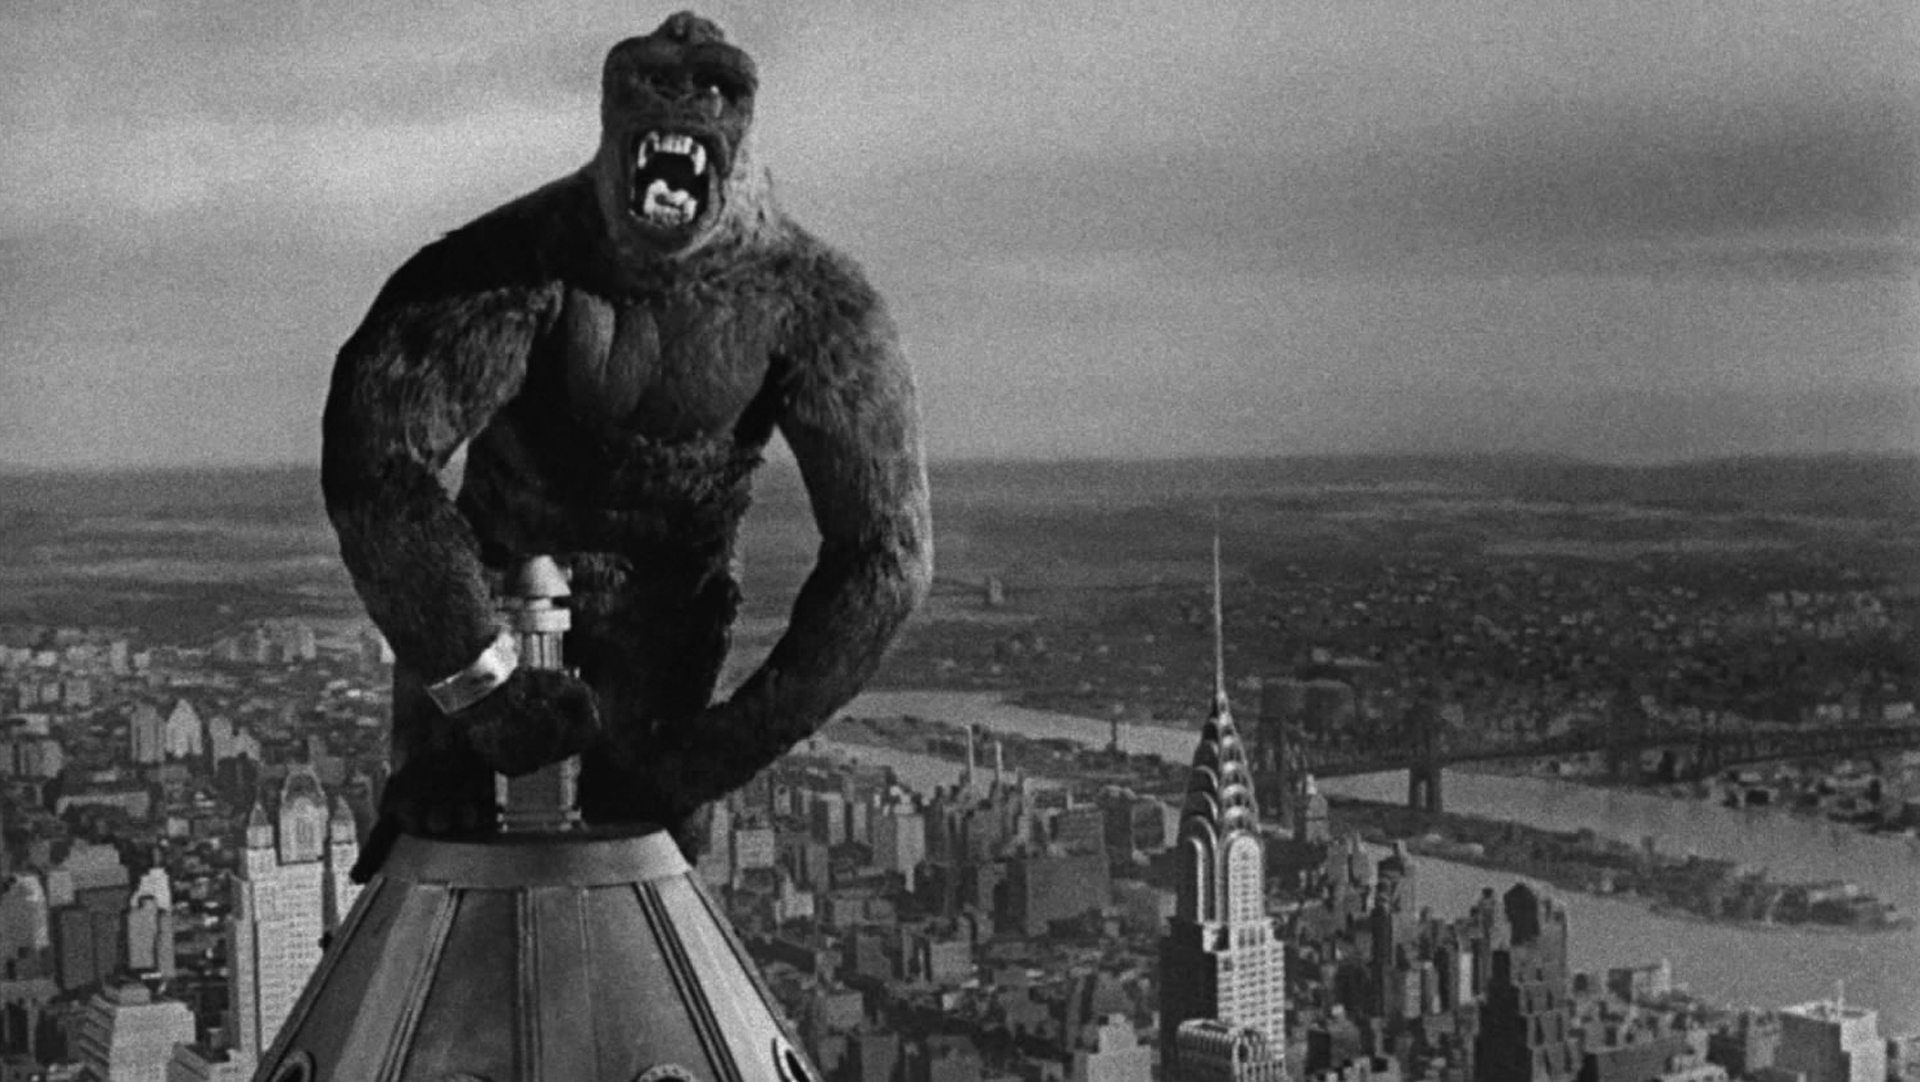 king kong empire state building 1933